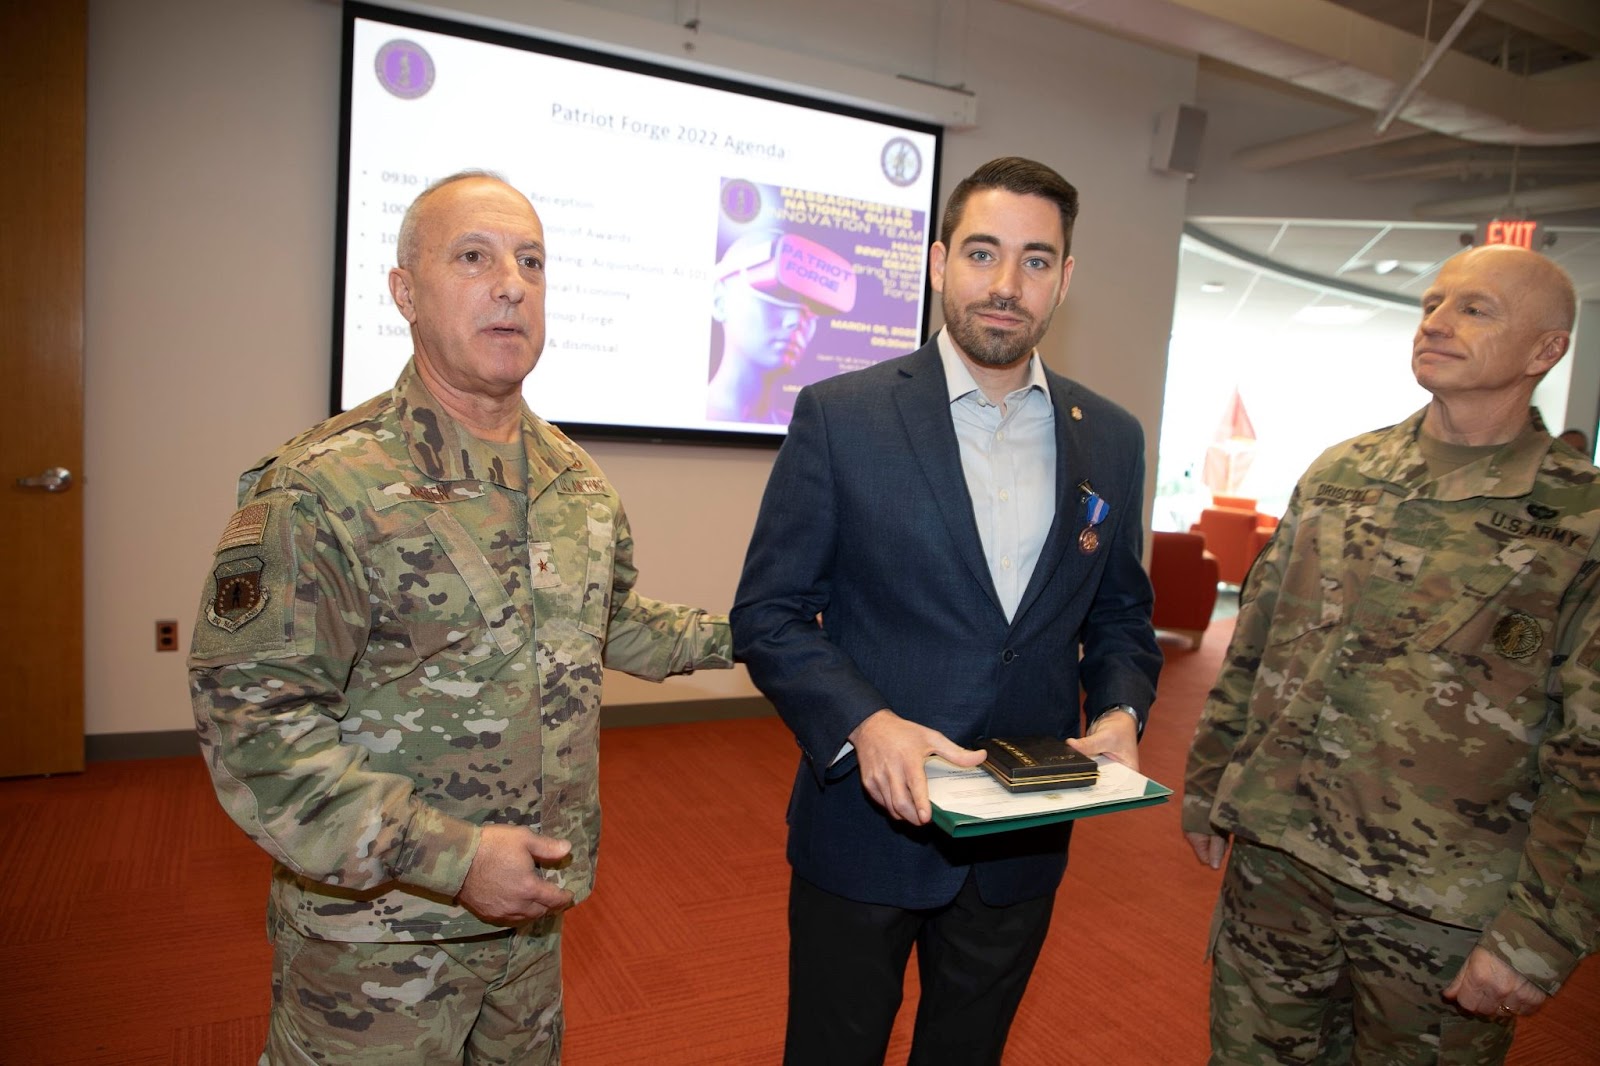 Merighi Honored by the Army for Innovation Leadership